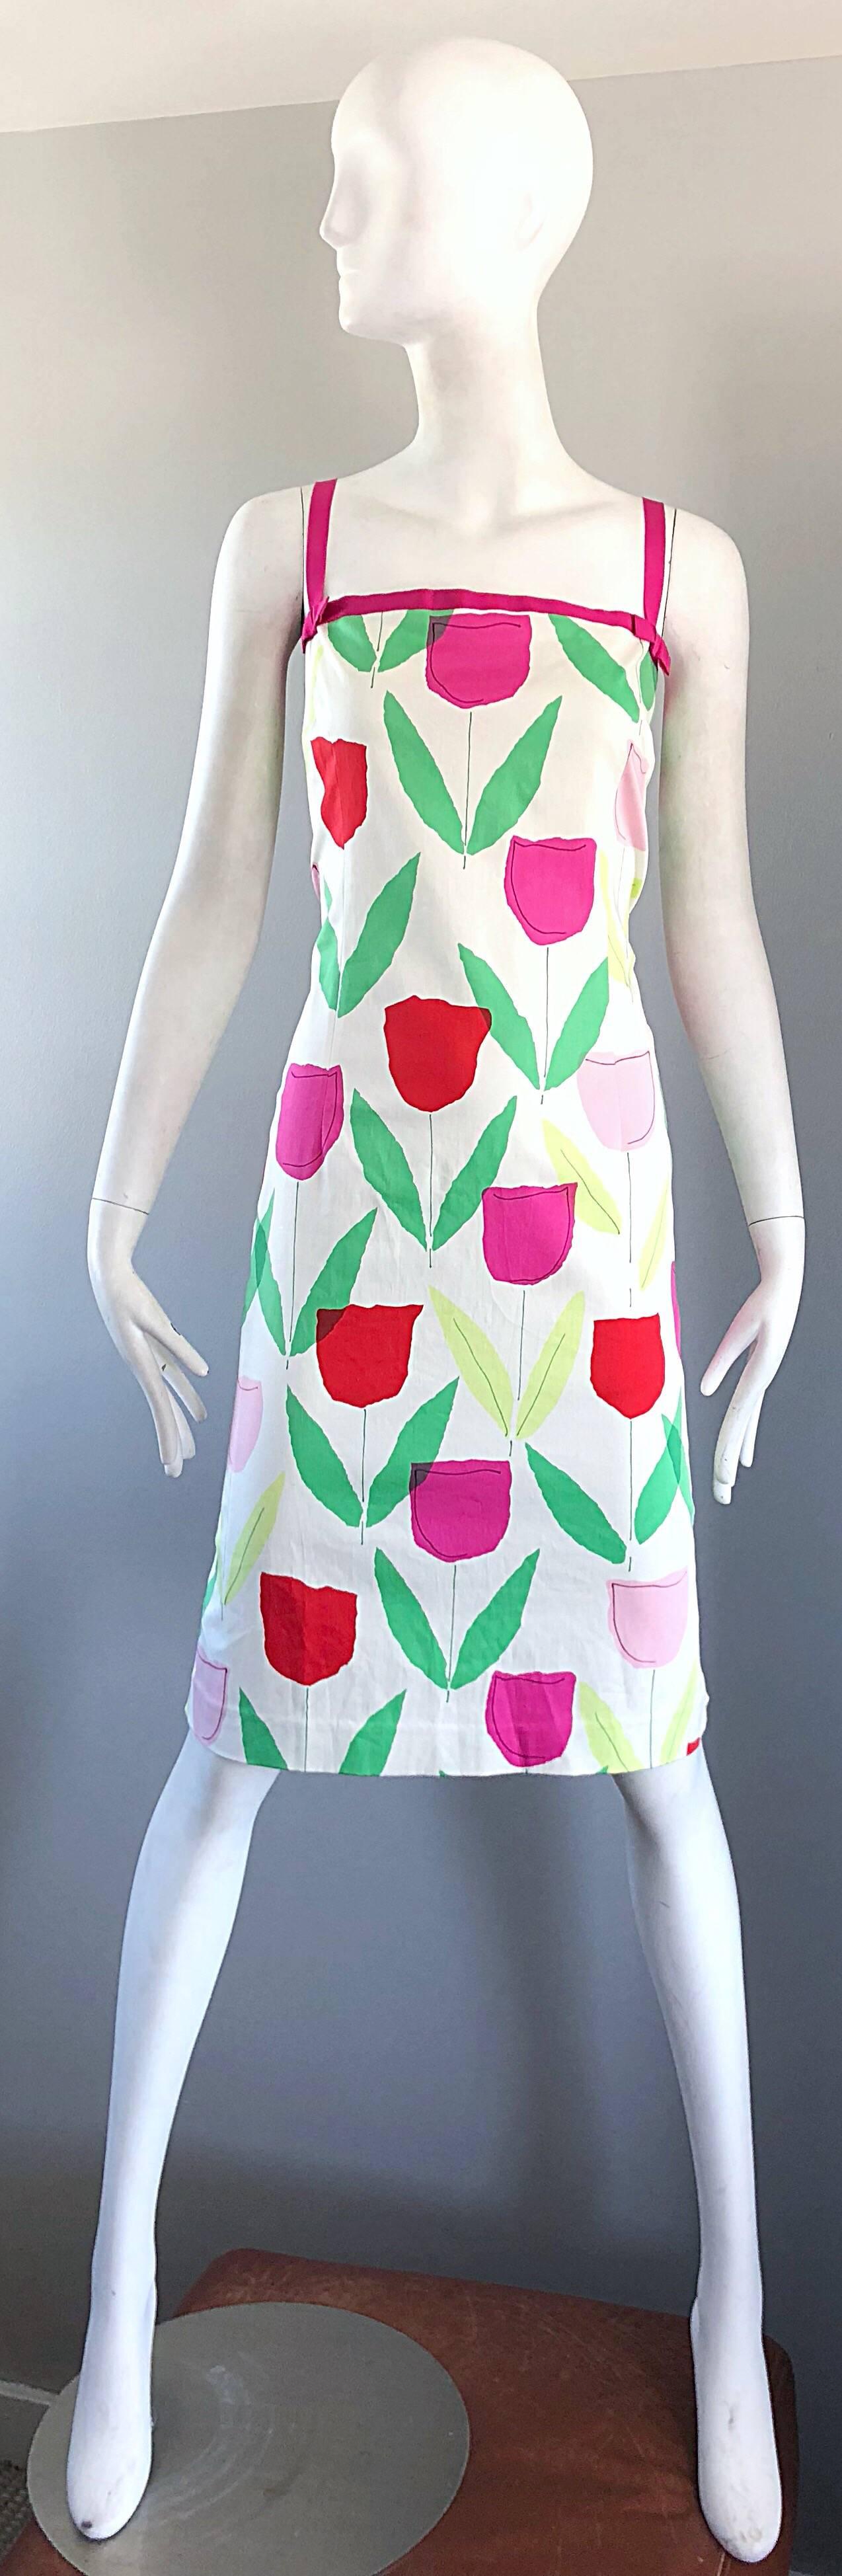 Beautiful 90s MOSCHINO CHEAP & CHIC pink, red, green, yellow and white tulip/rose print shift dress! Features hot pink, light pink, and red flowers with kelly green leaves printed throughout. Hot pink silk grosgrain ribbon sleeves and trim, with